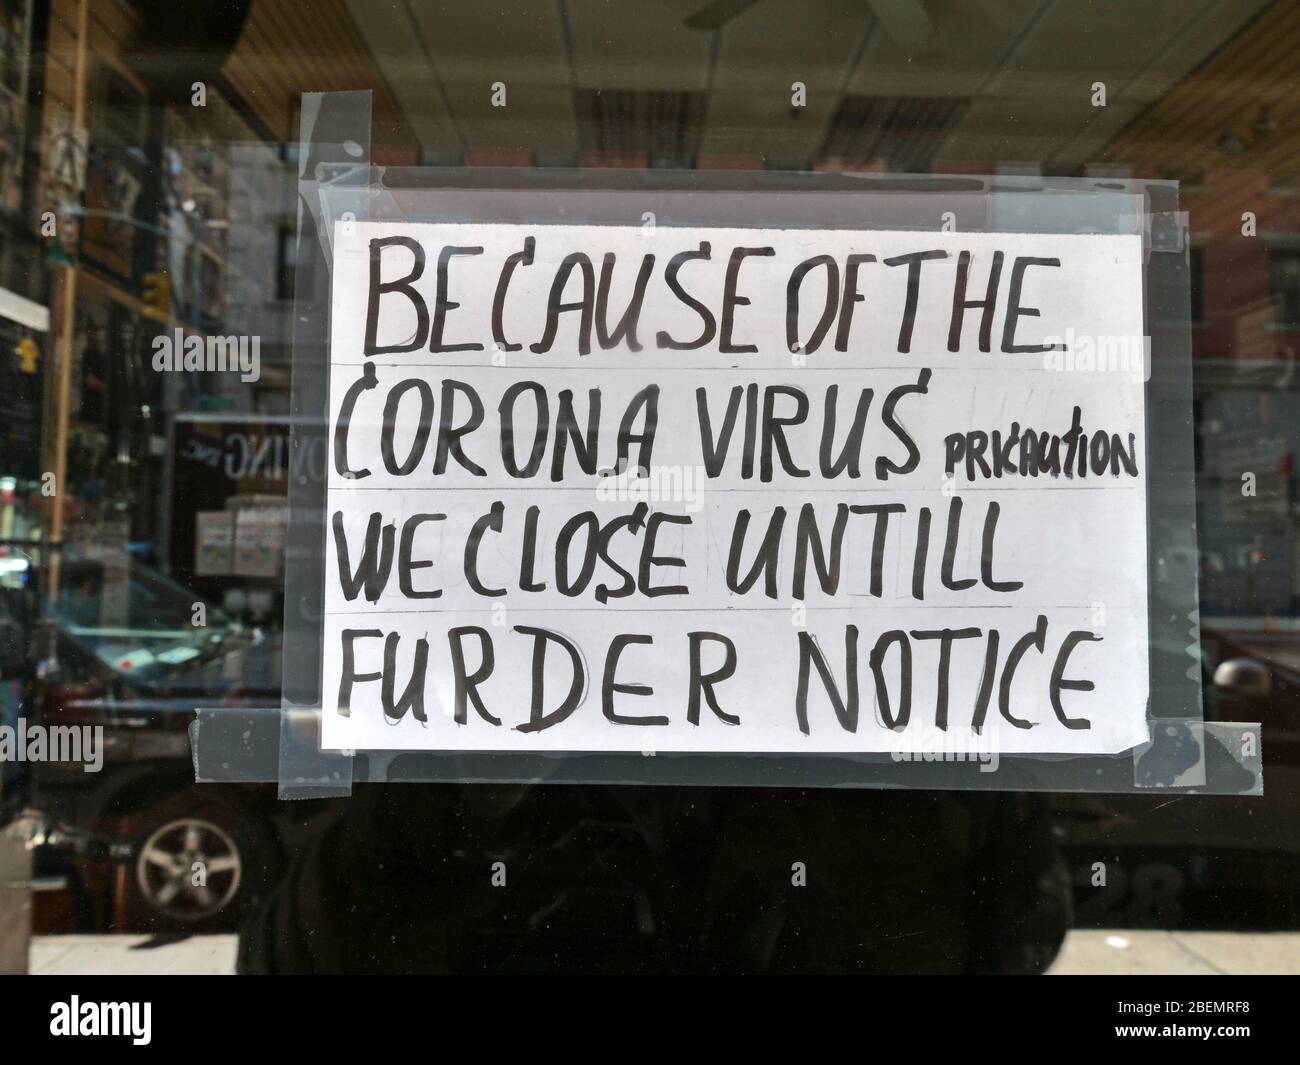 New York, New York, USA. 14th Apr, 2020. Despite a few spelling errors this handwritten sign on a barber shop in lower manhattan nyc gets its unfortunate message out. Credit: Milo Hess/ZUMA Wire/Alamy Live News Stock Photo